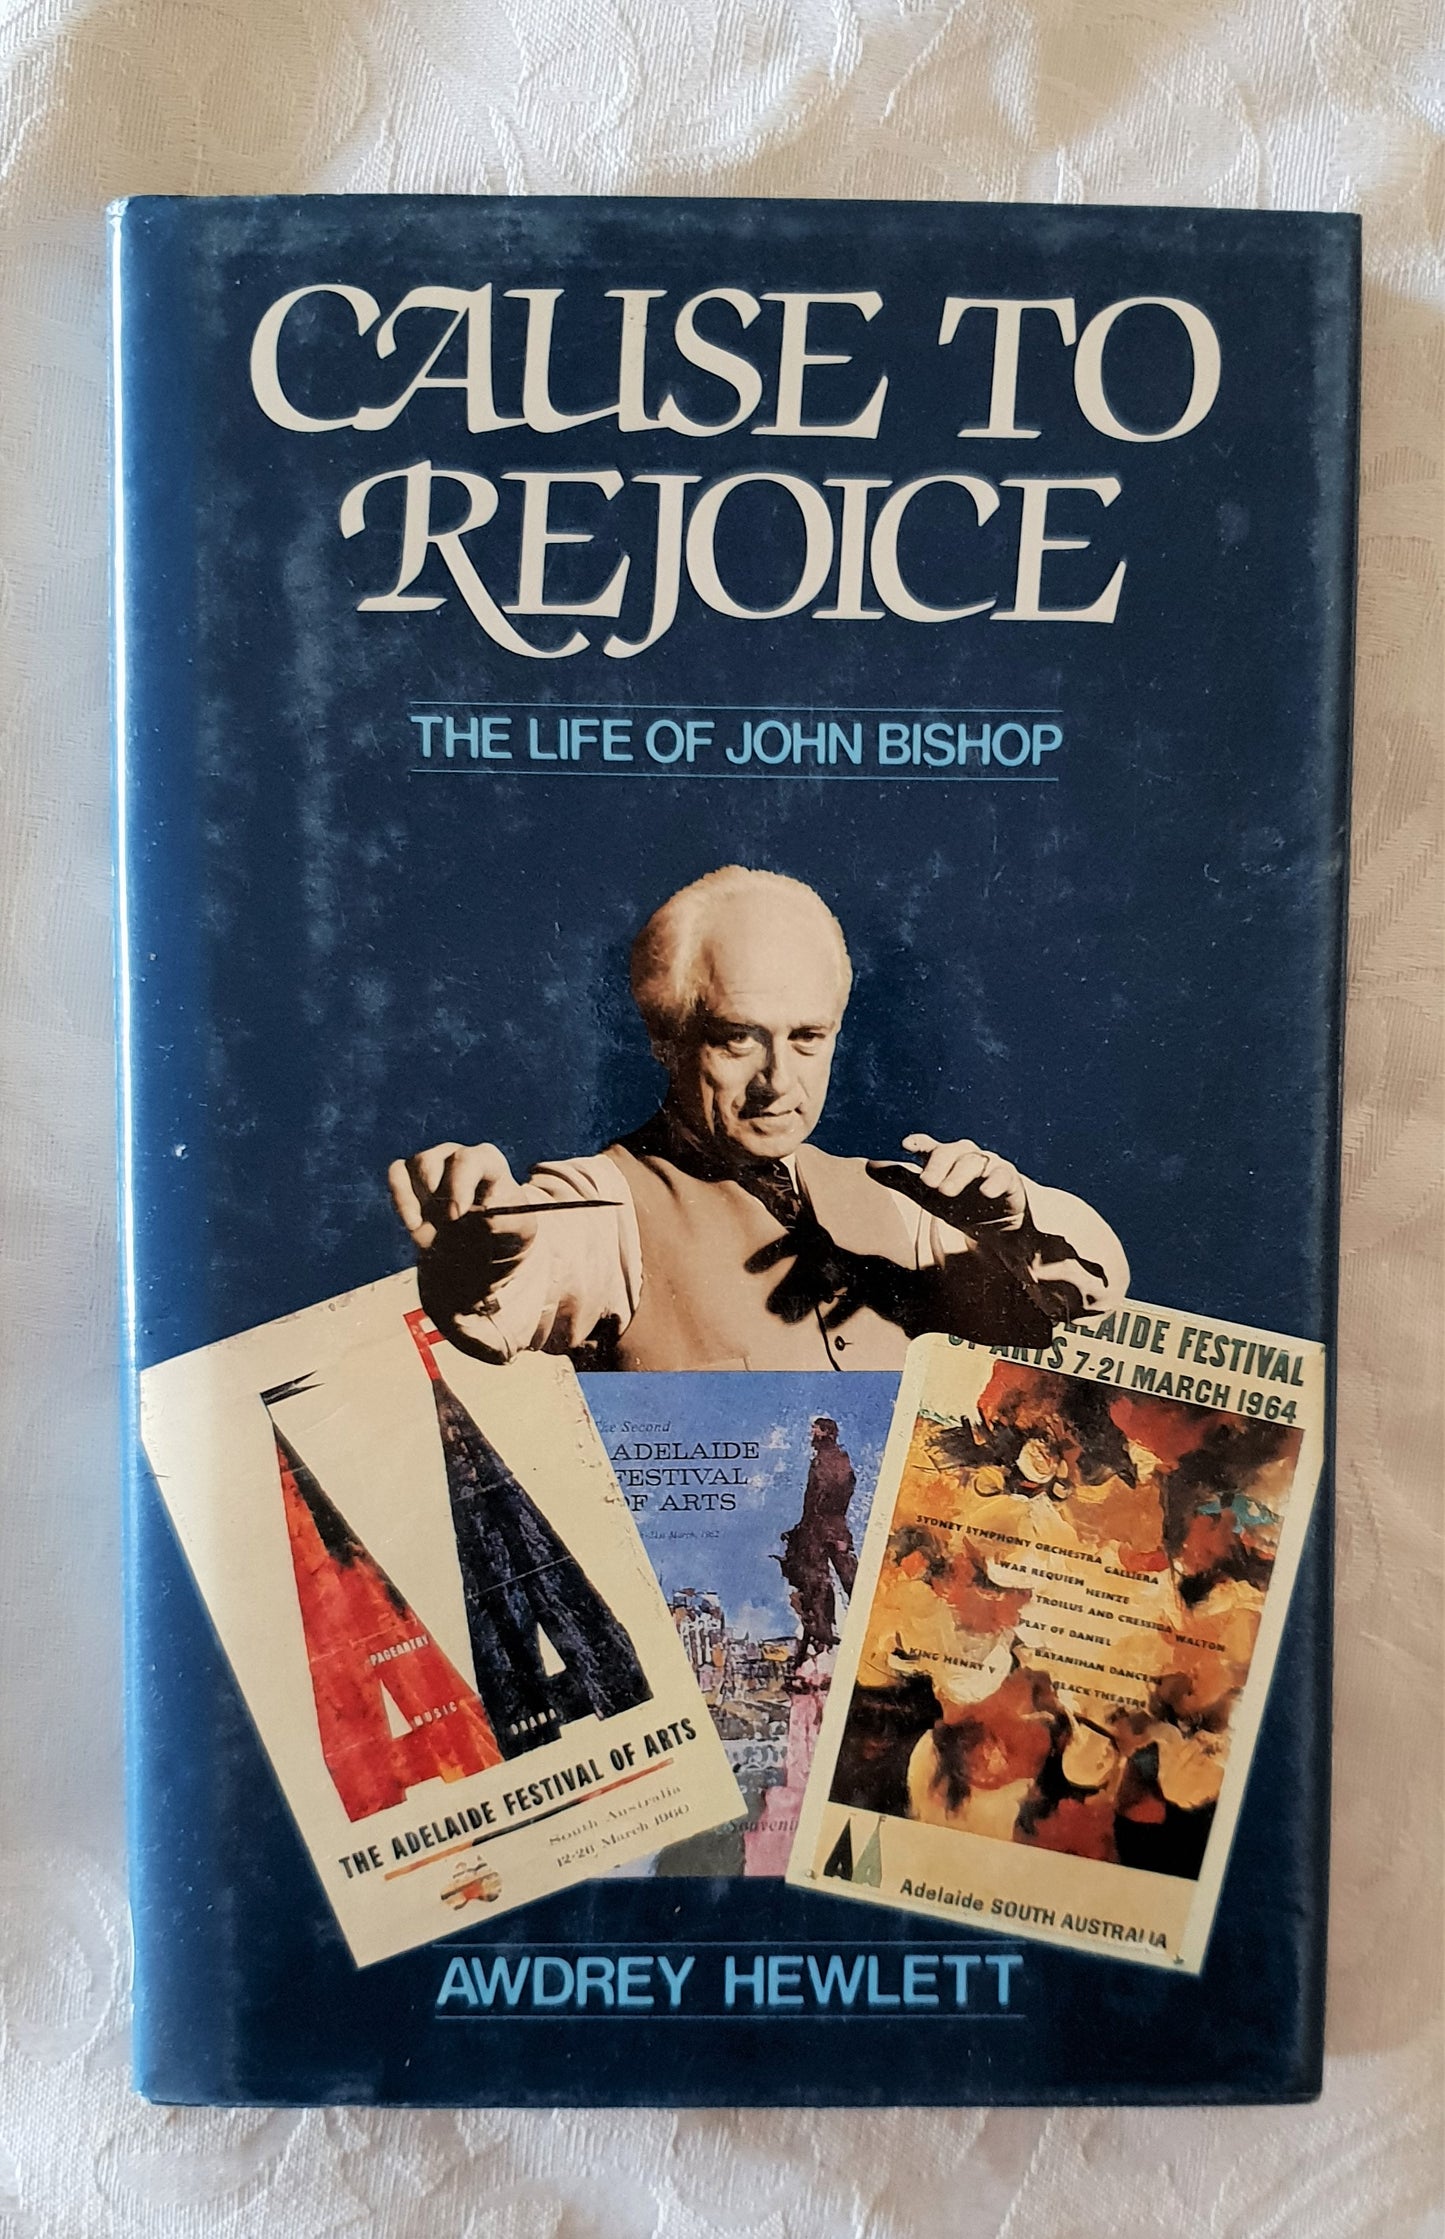 Cause To Rejoice  The Life of John Bishop  by Awdrey Hewlett